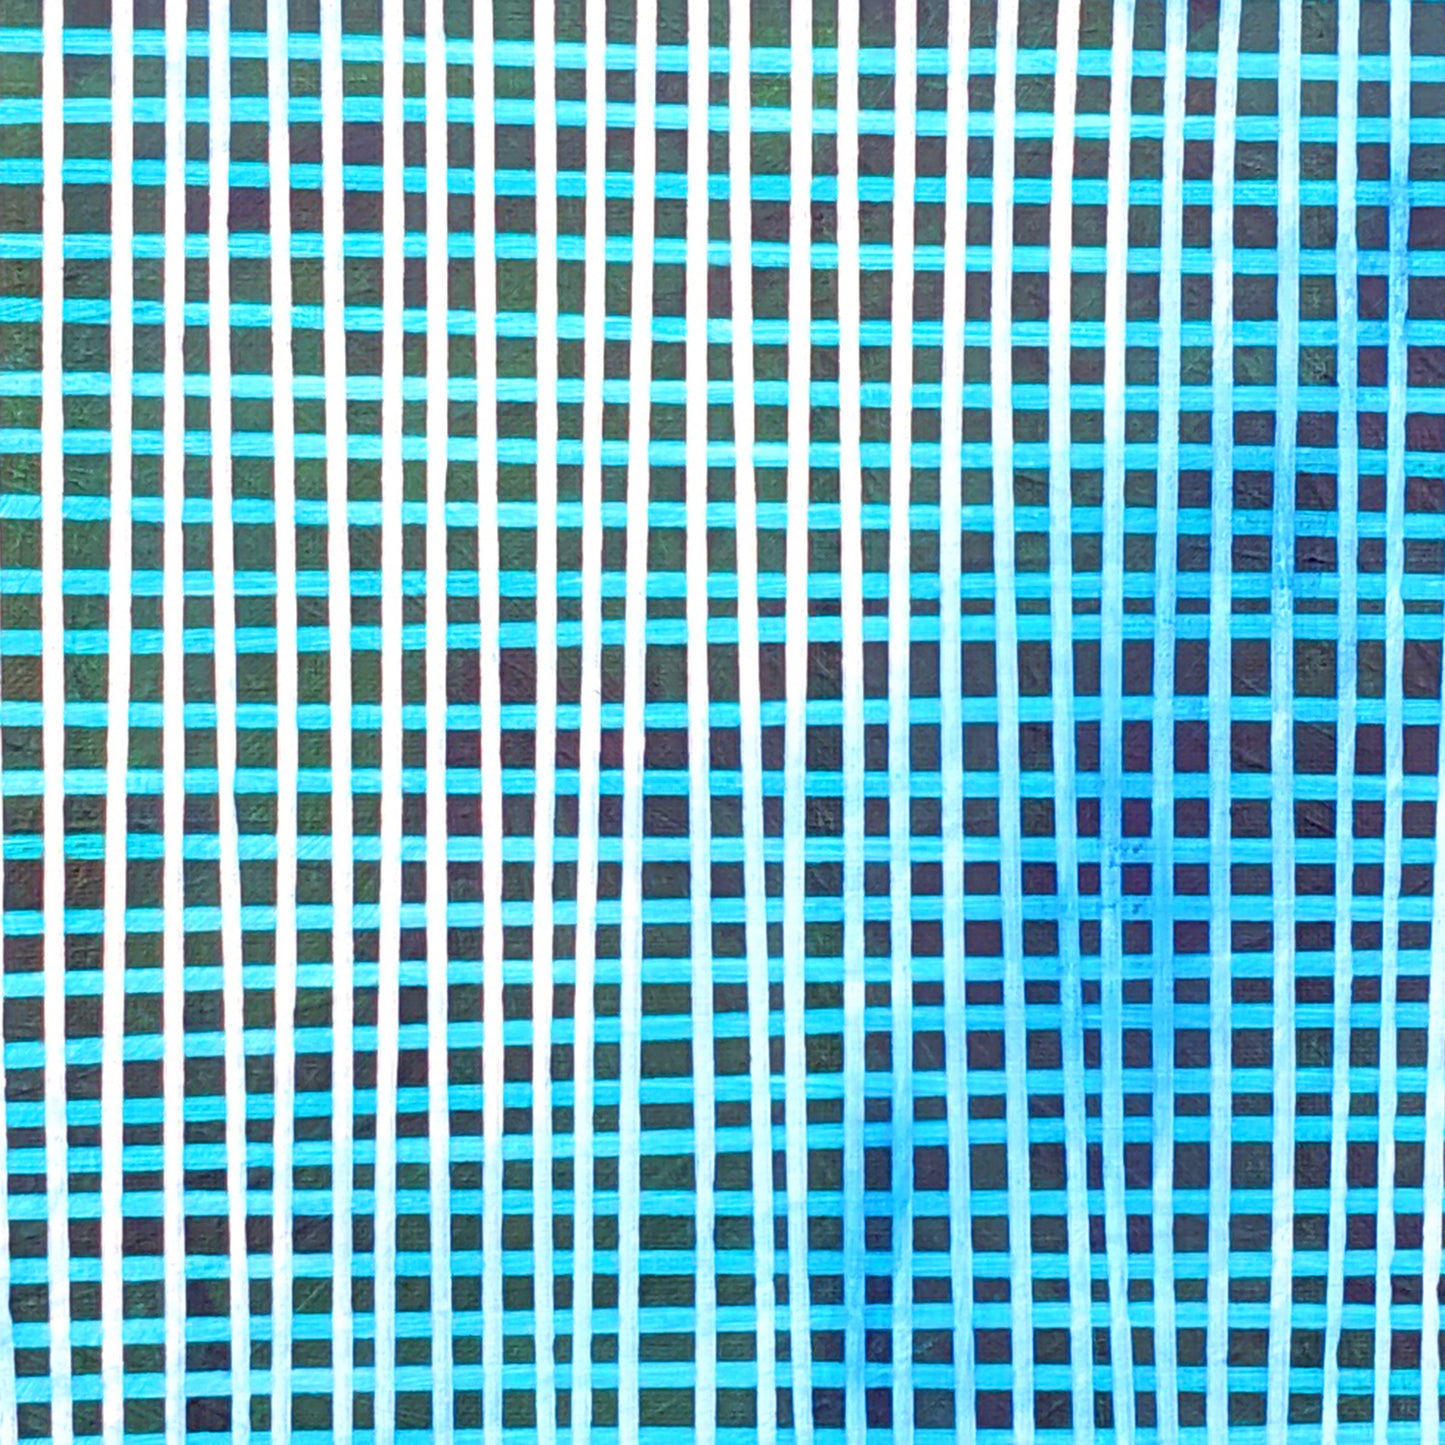 Color Study in Blue 24x18